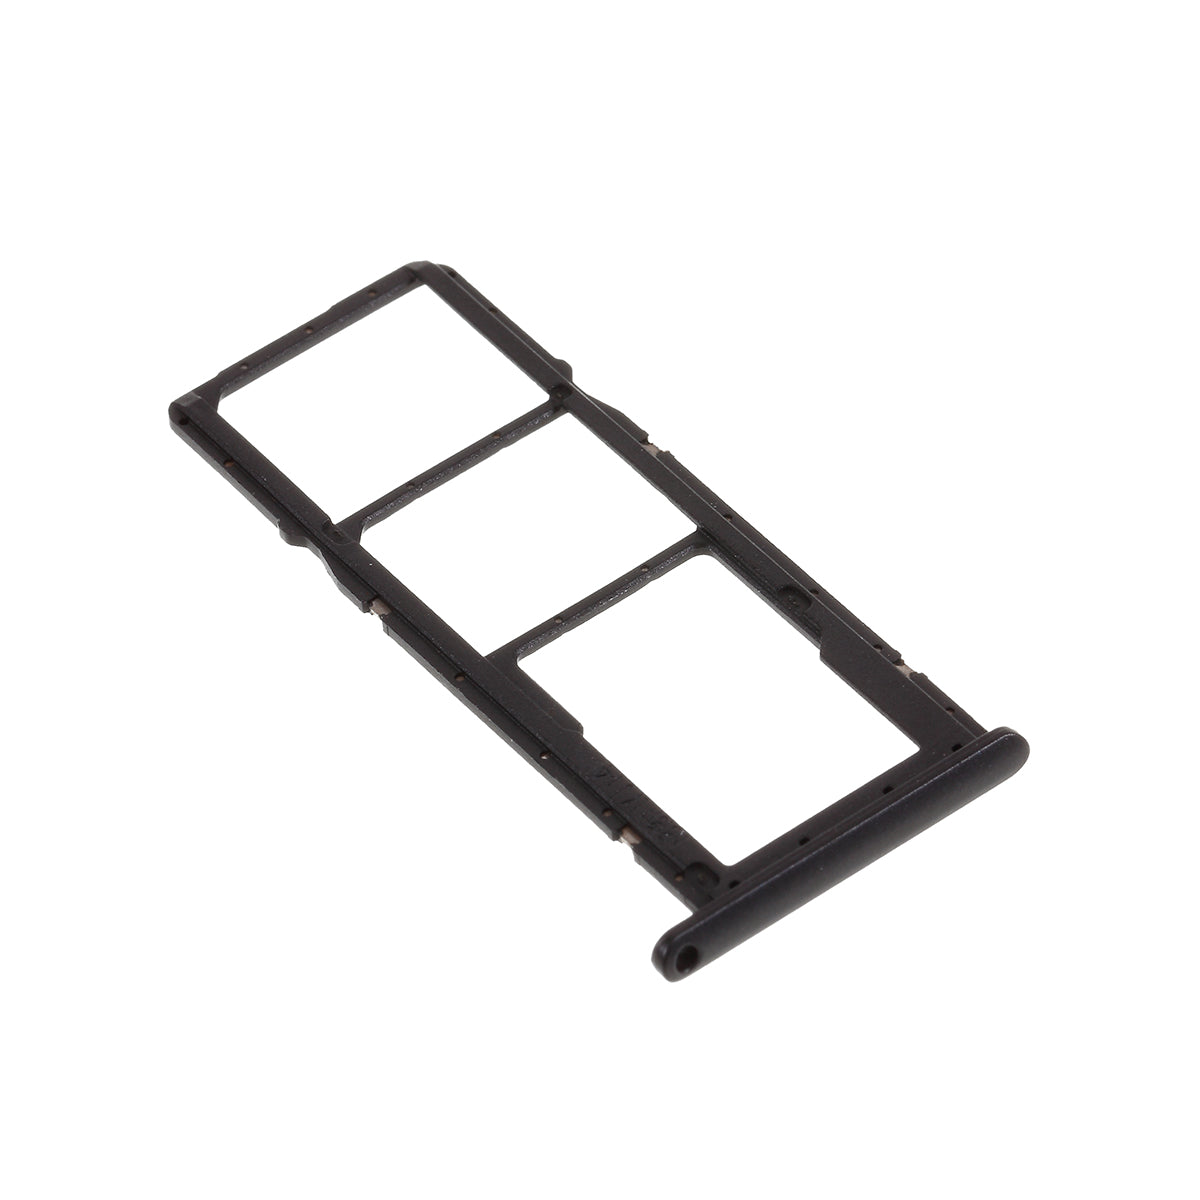 OEM SIM Card Tray Holder Replace Part for Huawei Honor 8A / Honor 8A Pro - Black